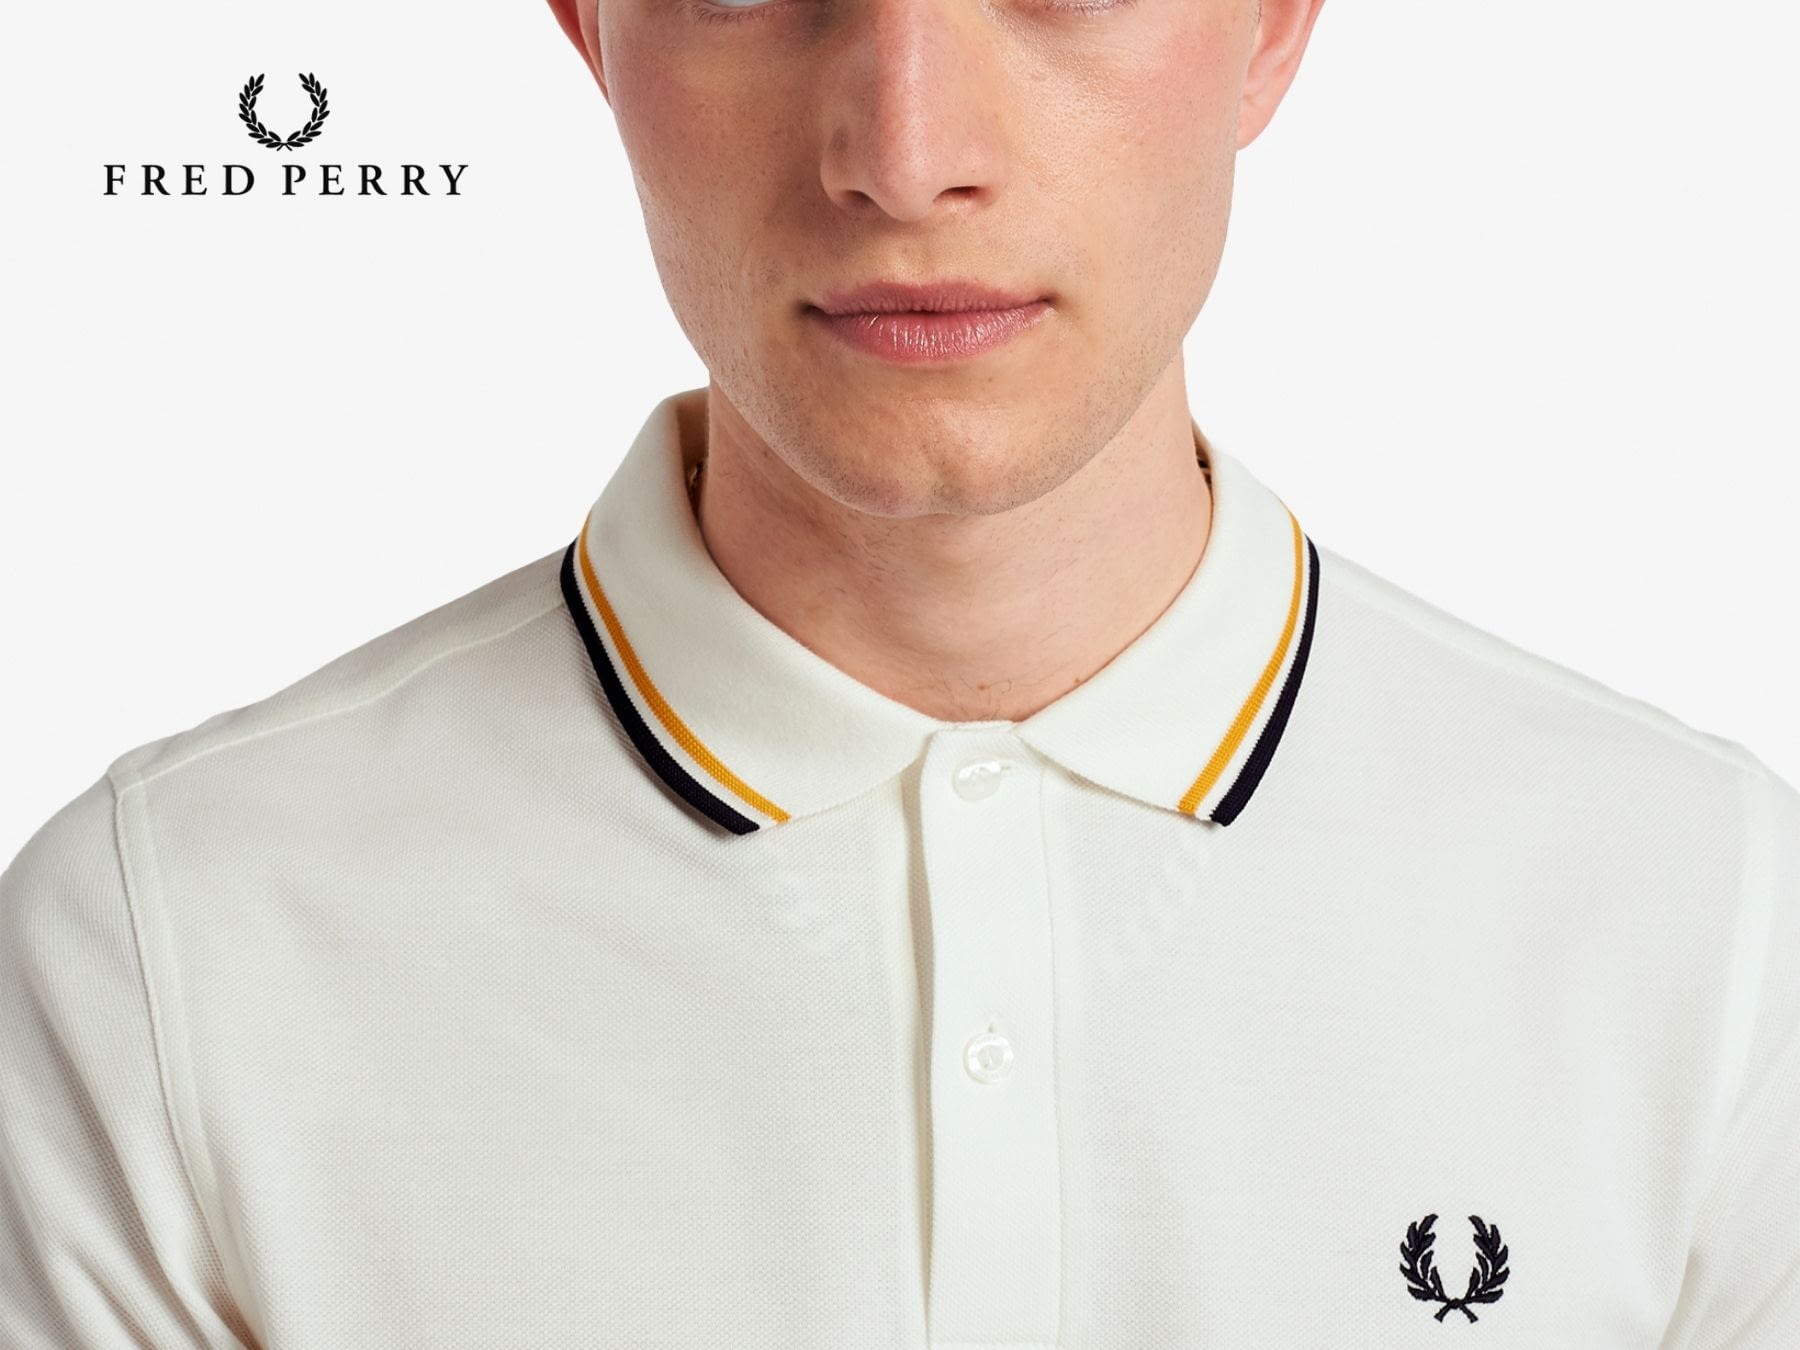 FRED PERRY abril 22